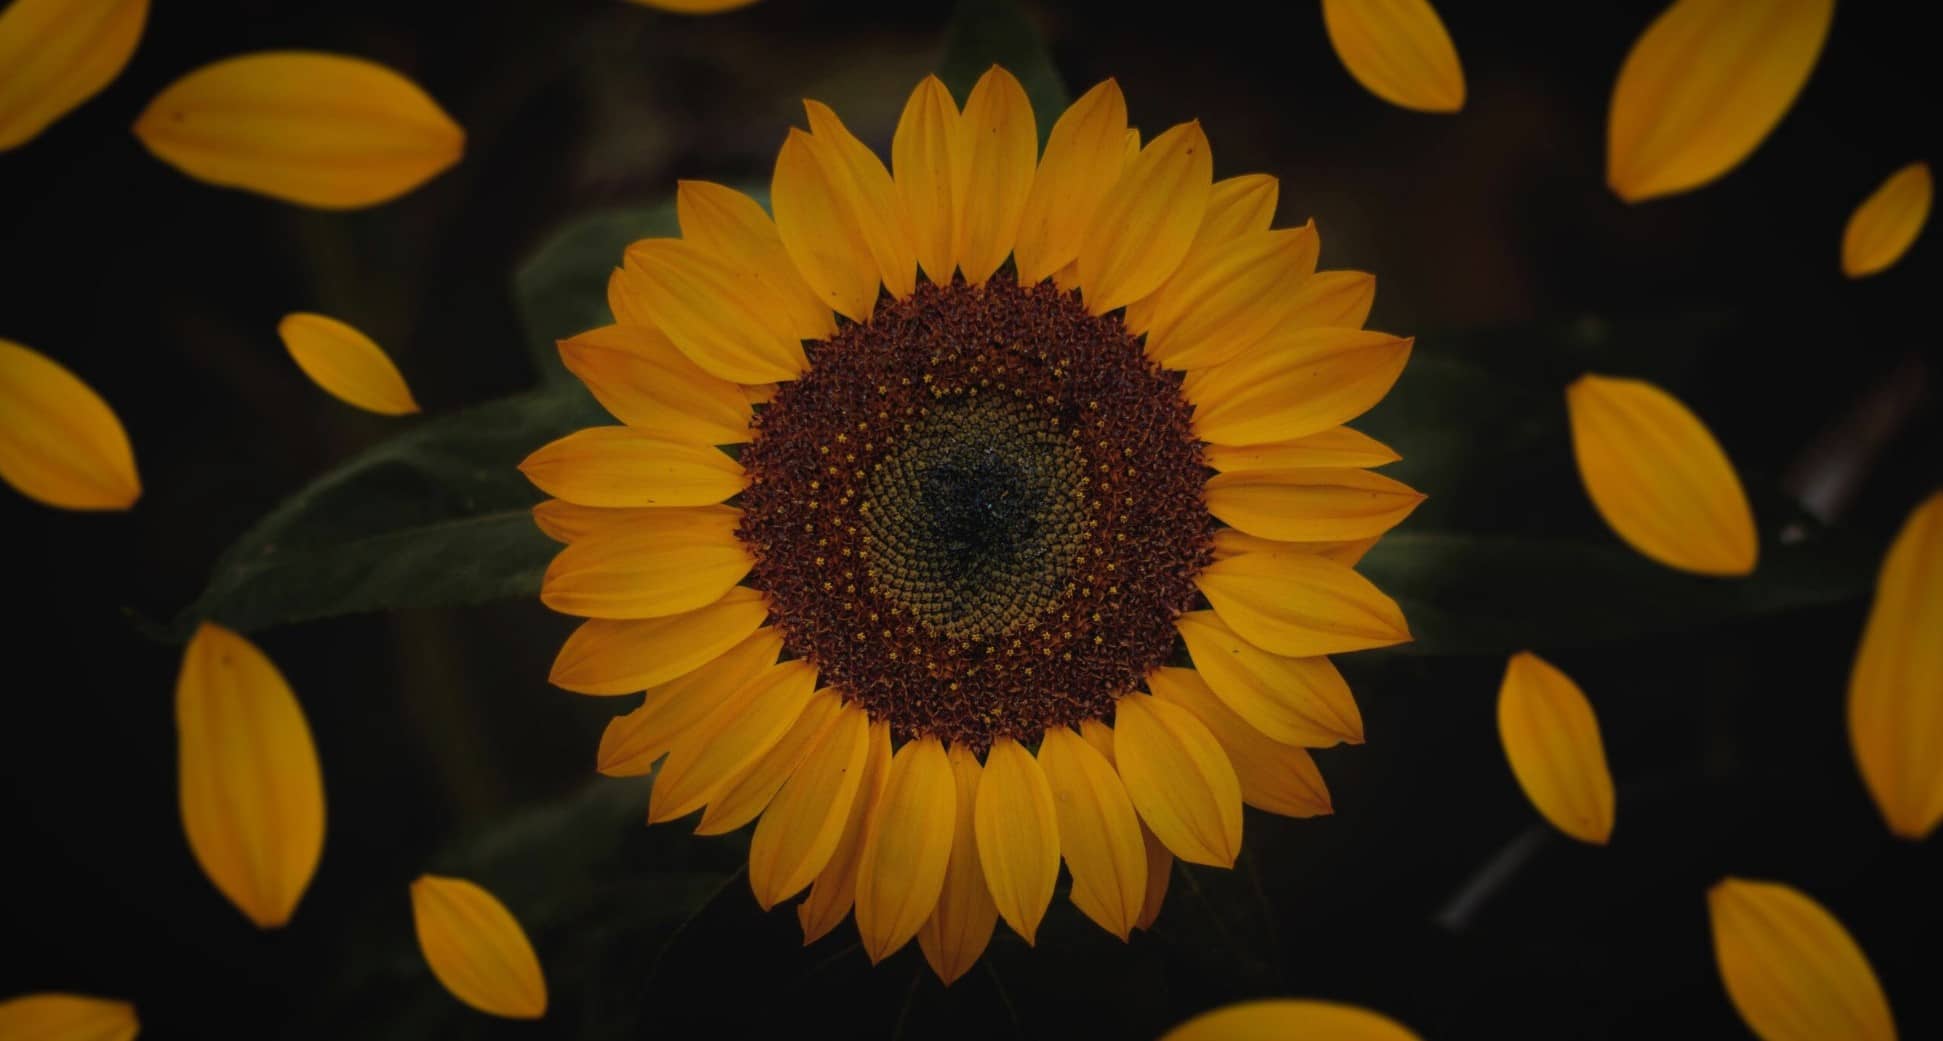 90 Sunflower Quotes To Inspire and Brighten Your Day